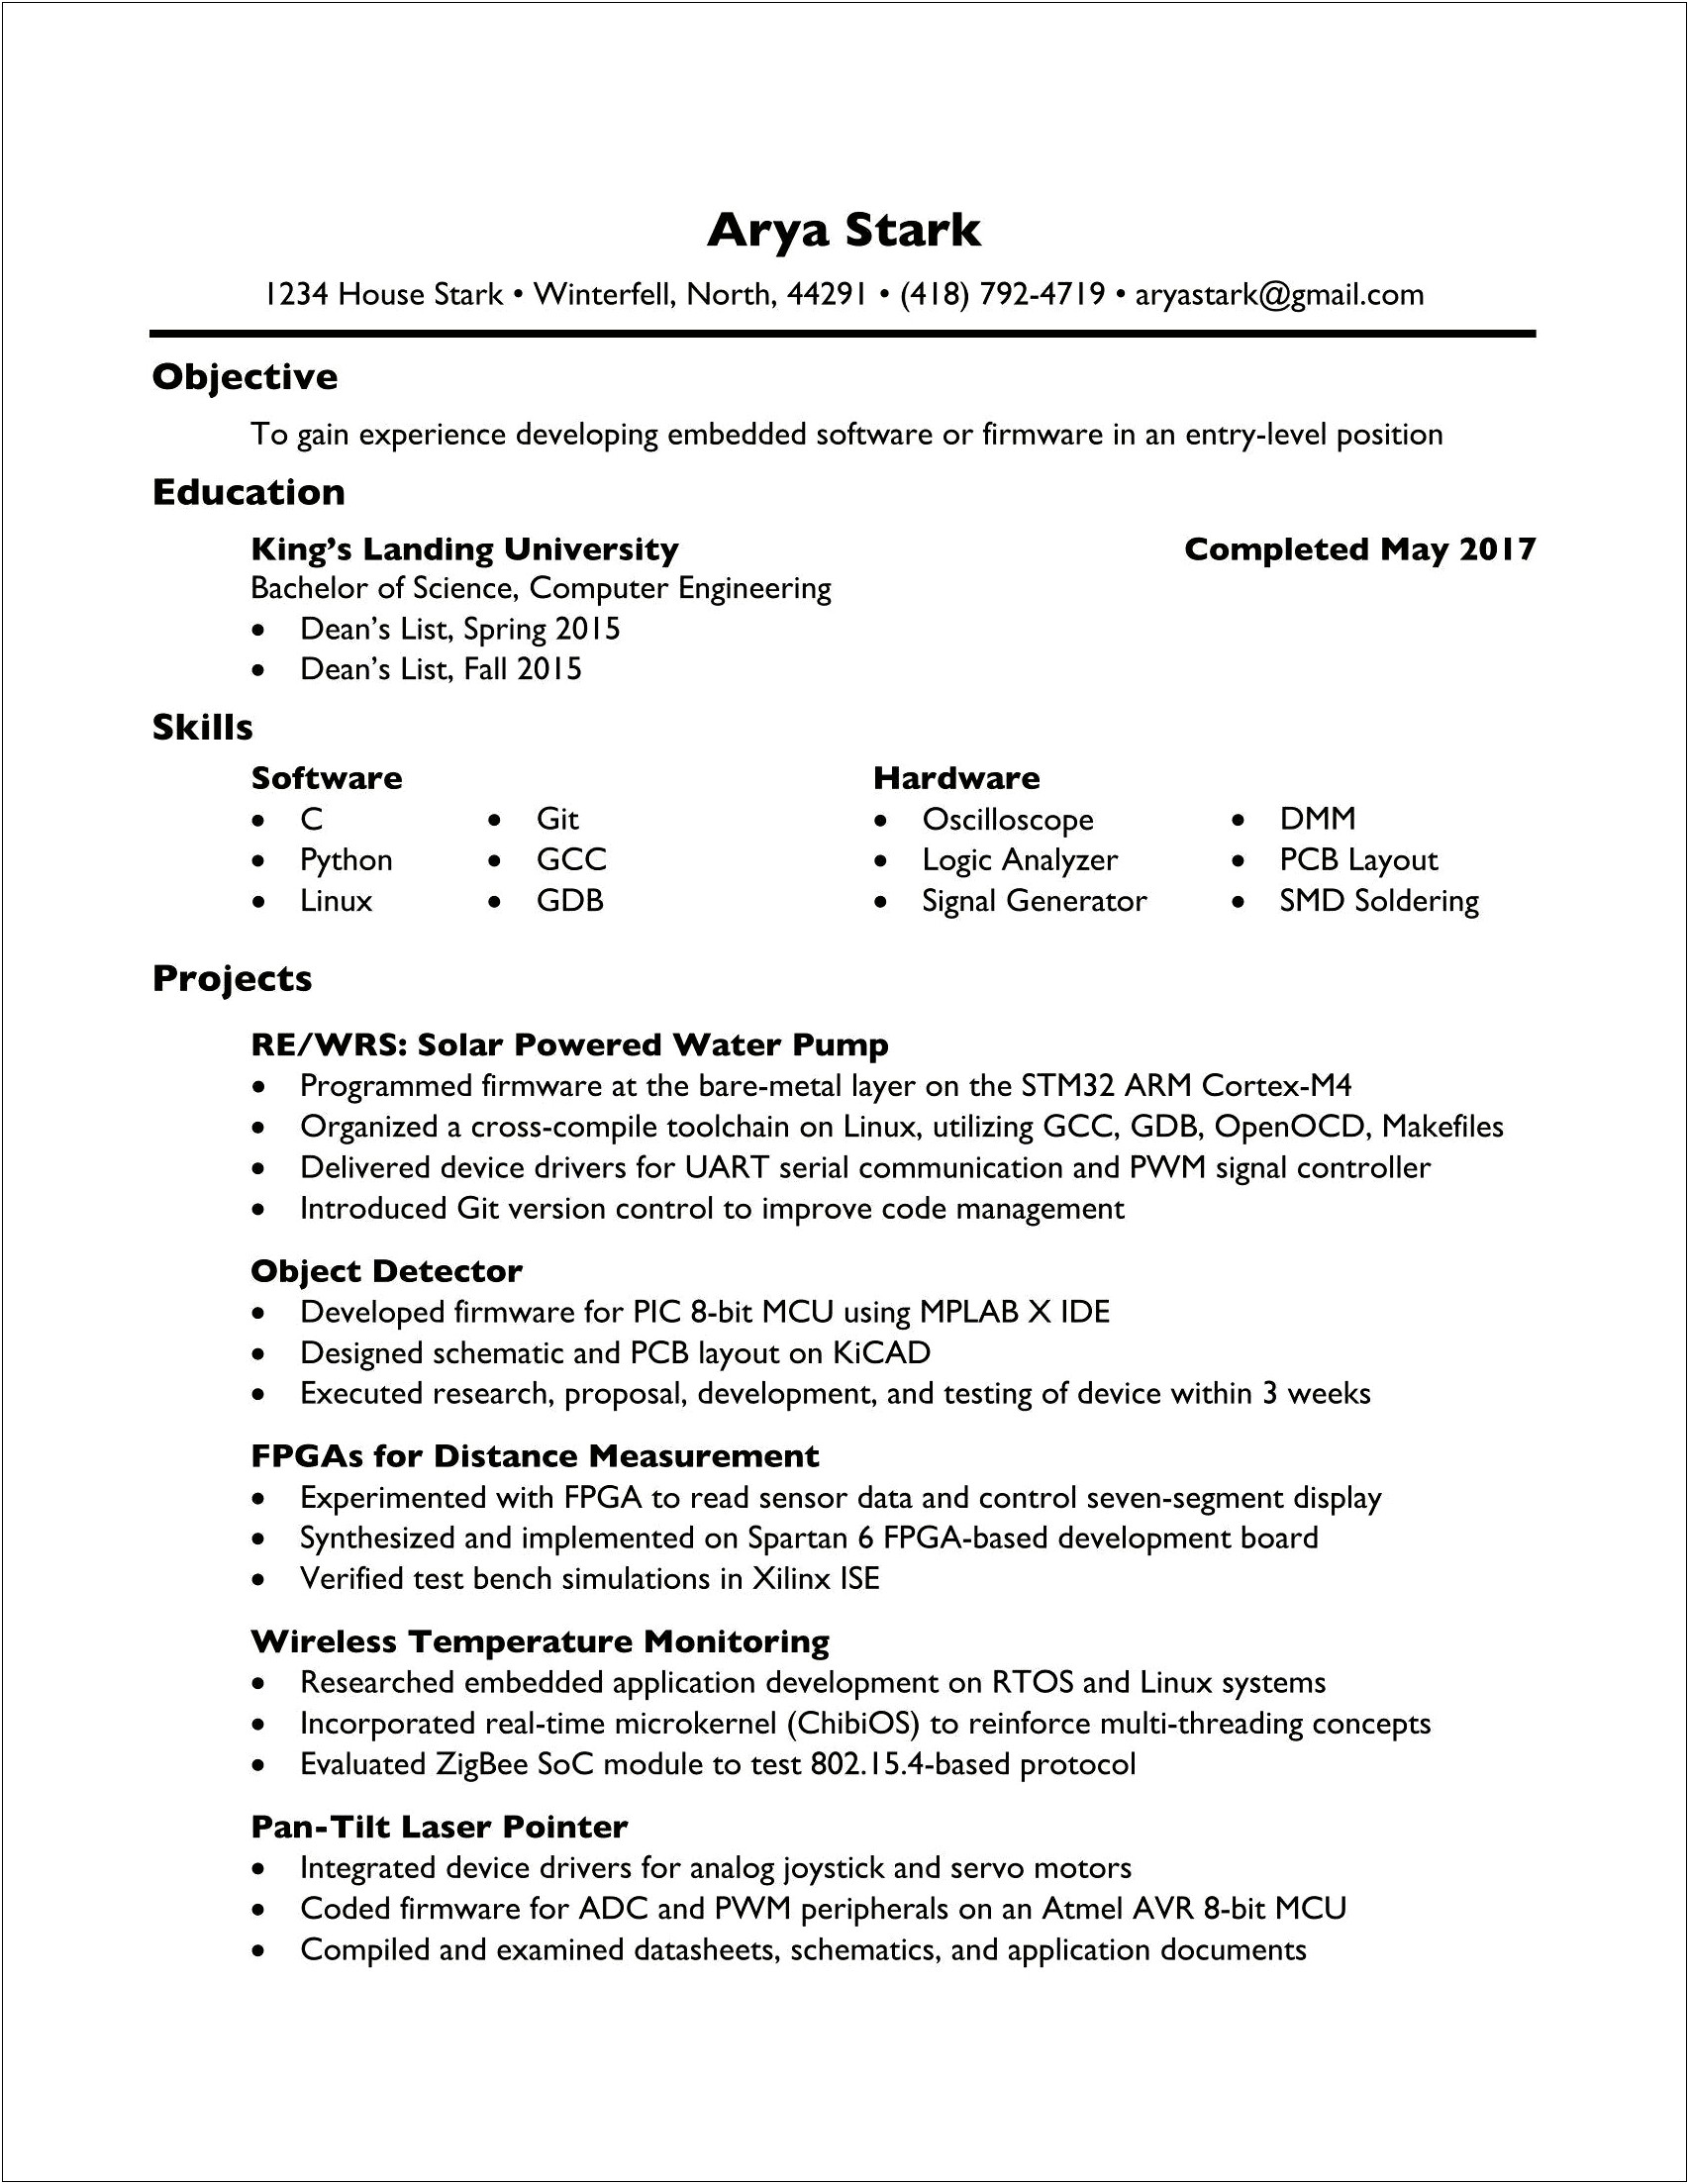 Resume Objective For Embedded Engineer